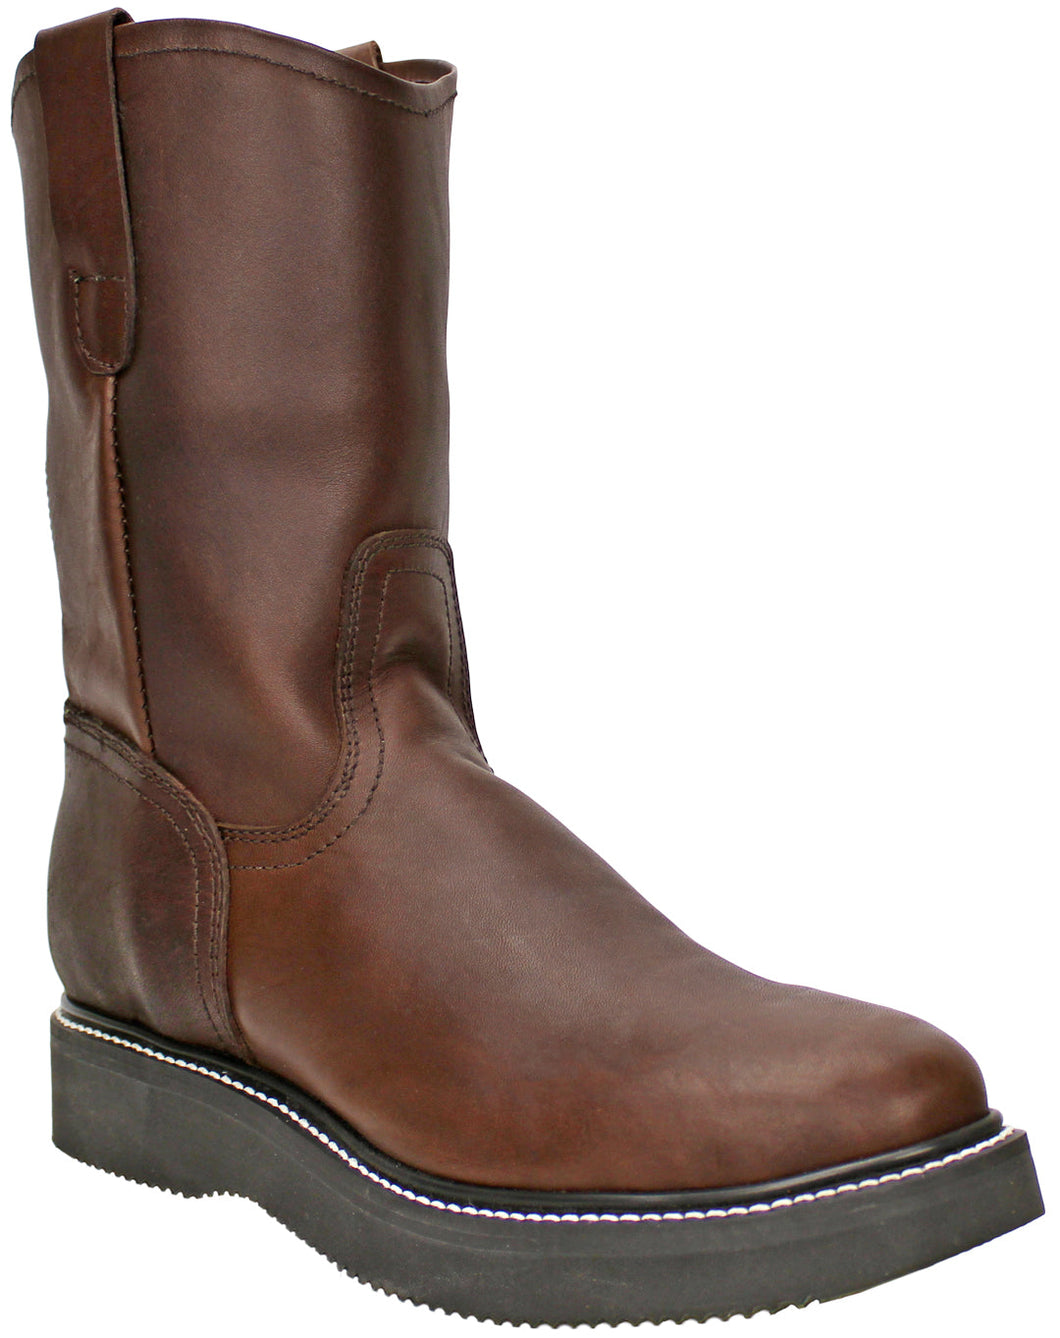 Silverton Greenfield All Leather Work Boot (Brown)